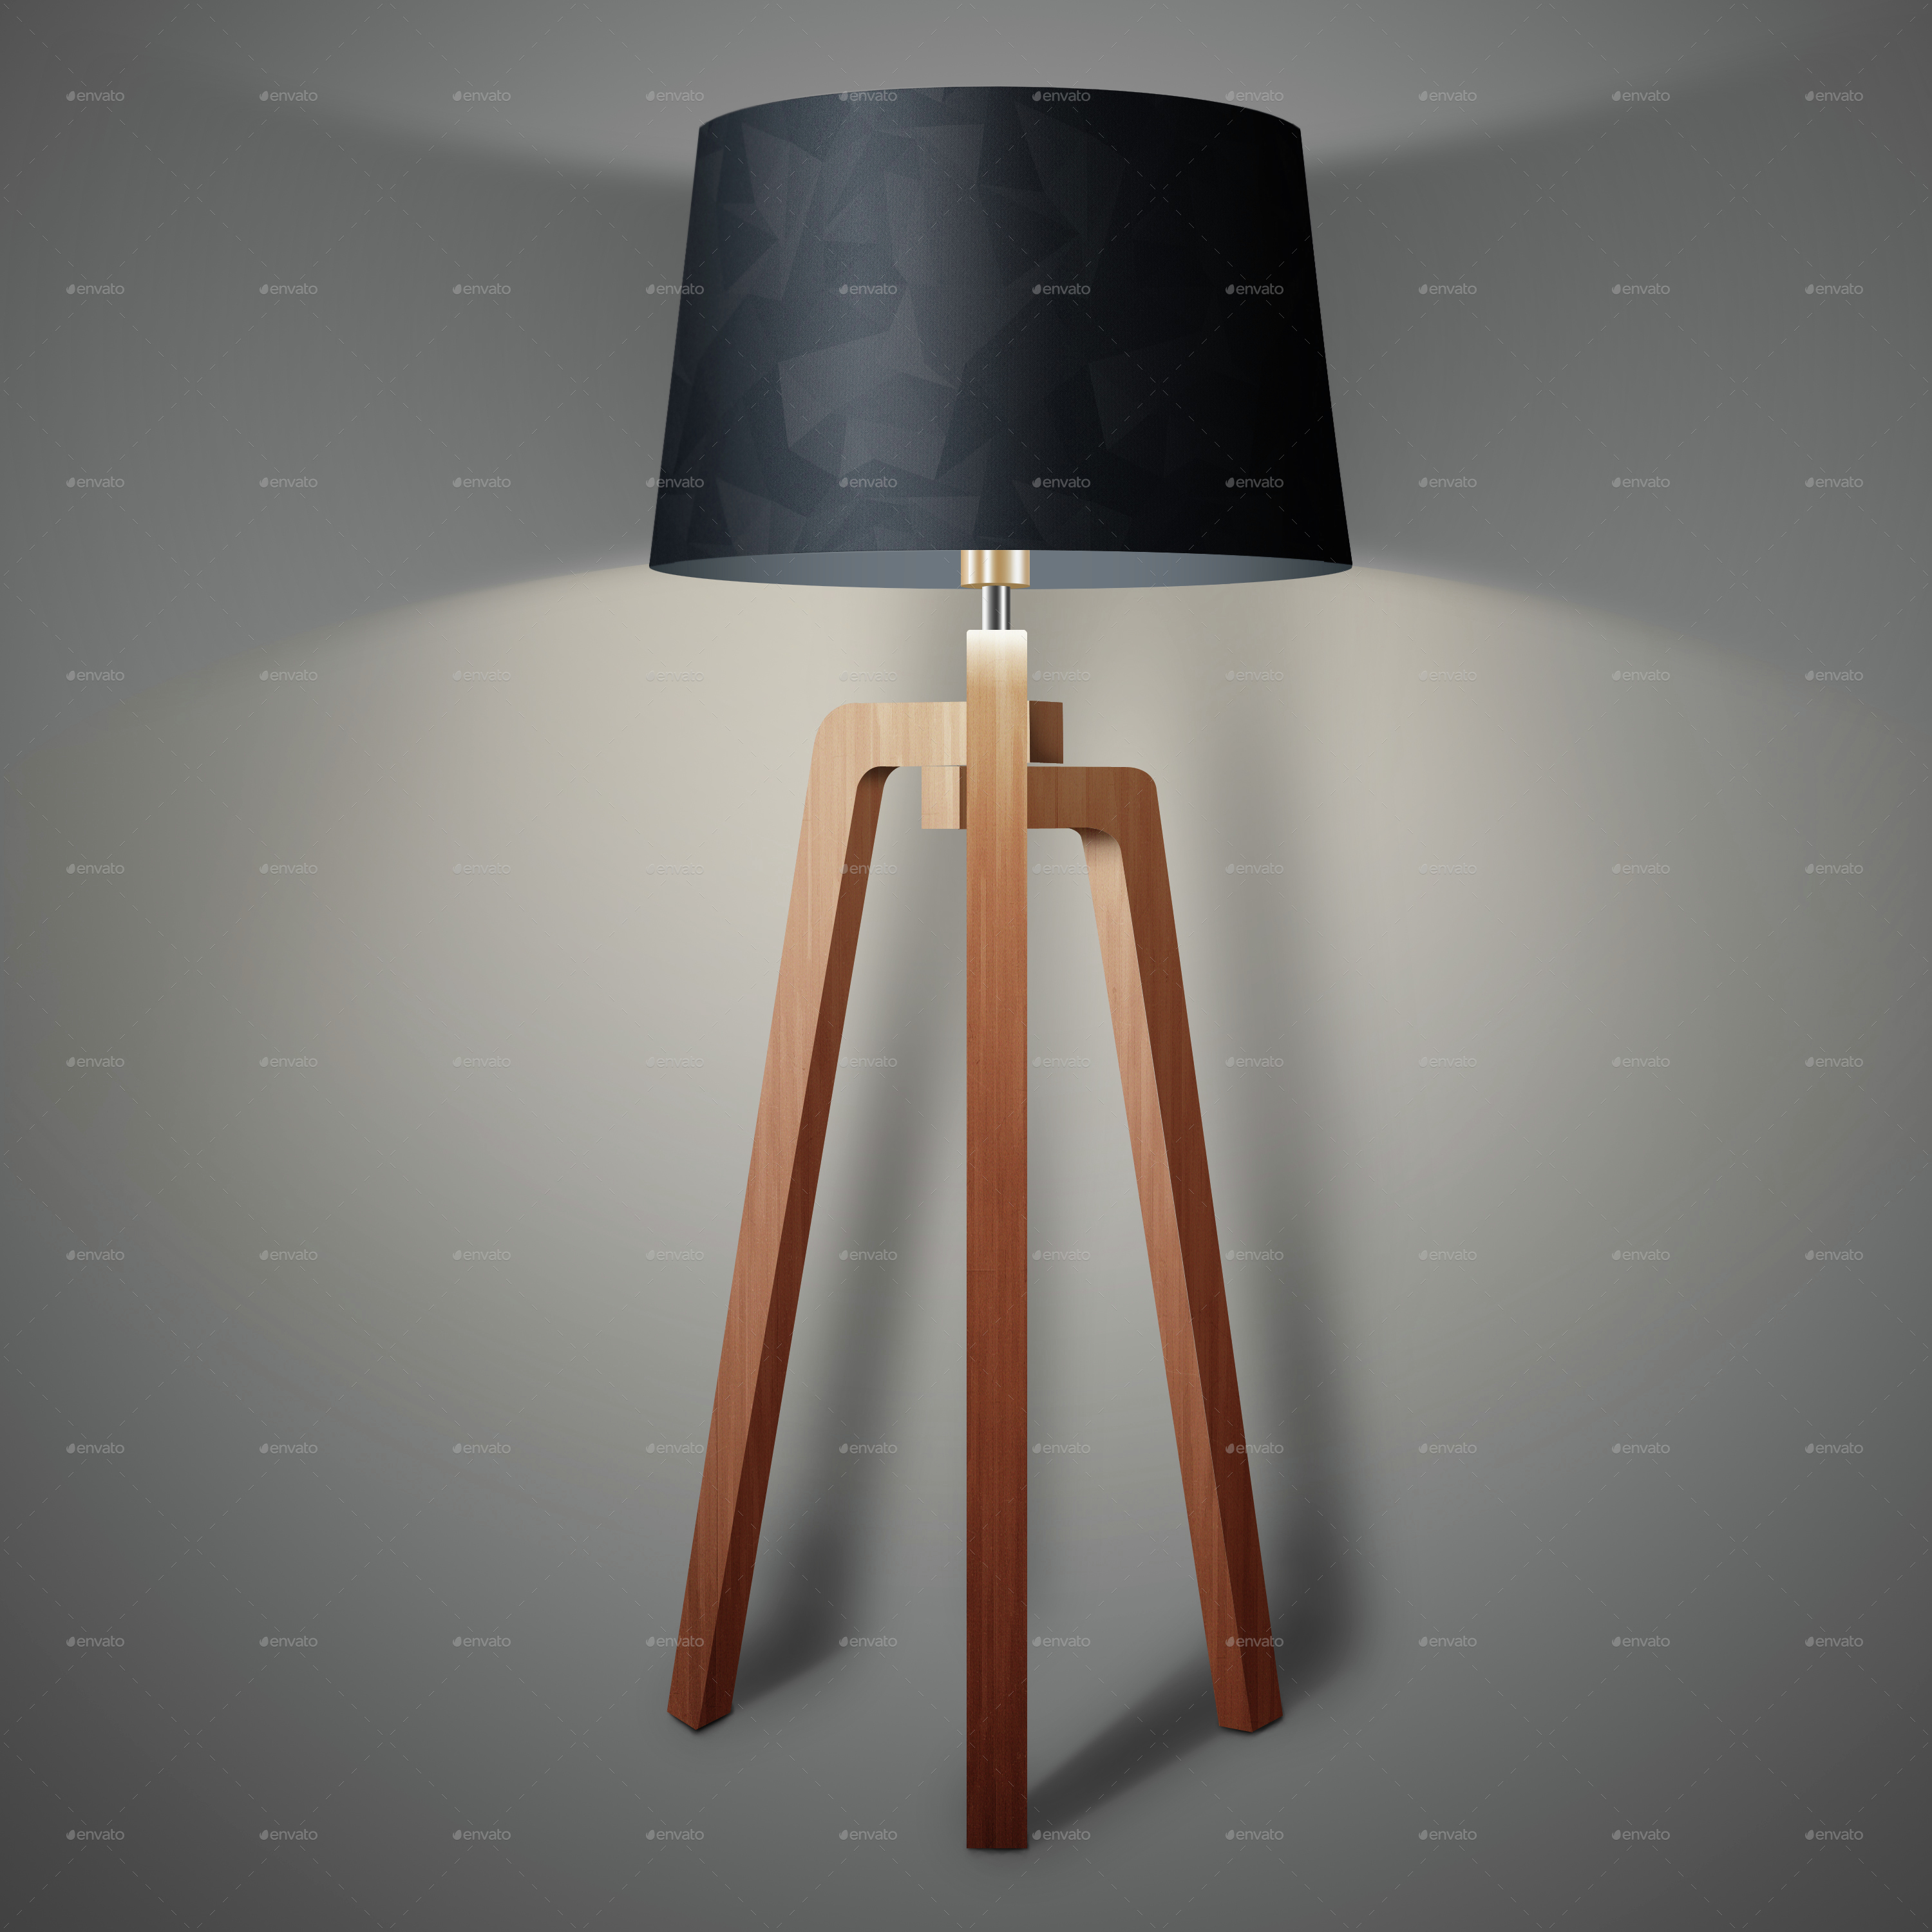 Download Lampshade Mockup Pack by harmanov | GraphicRiver